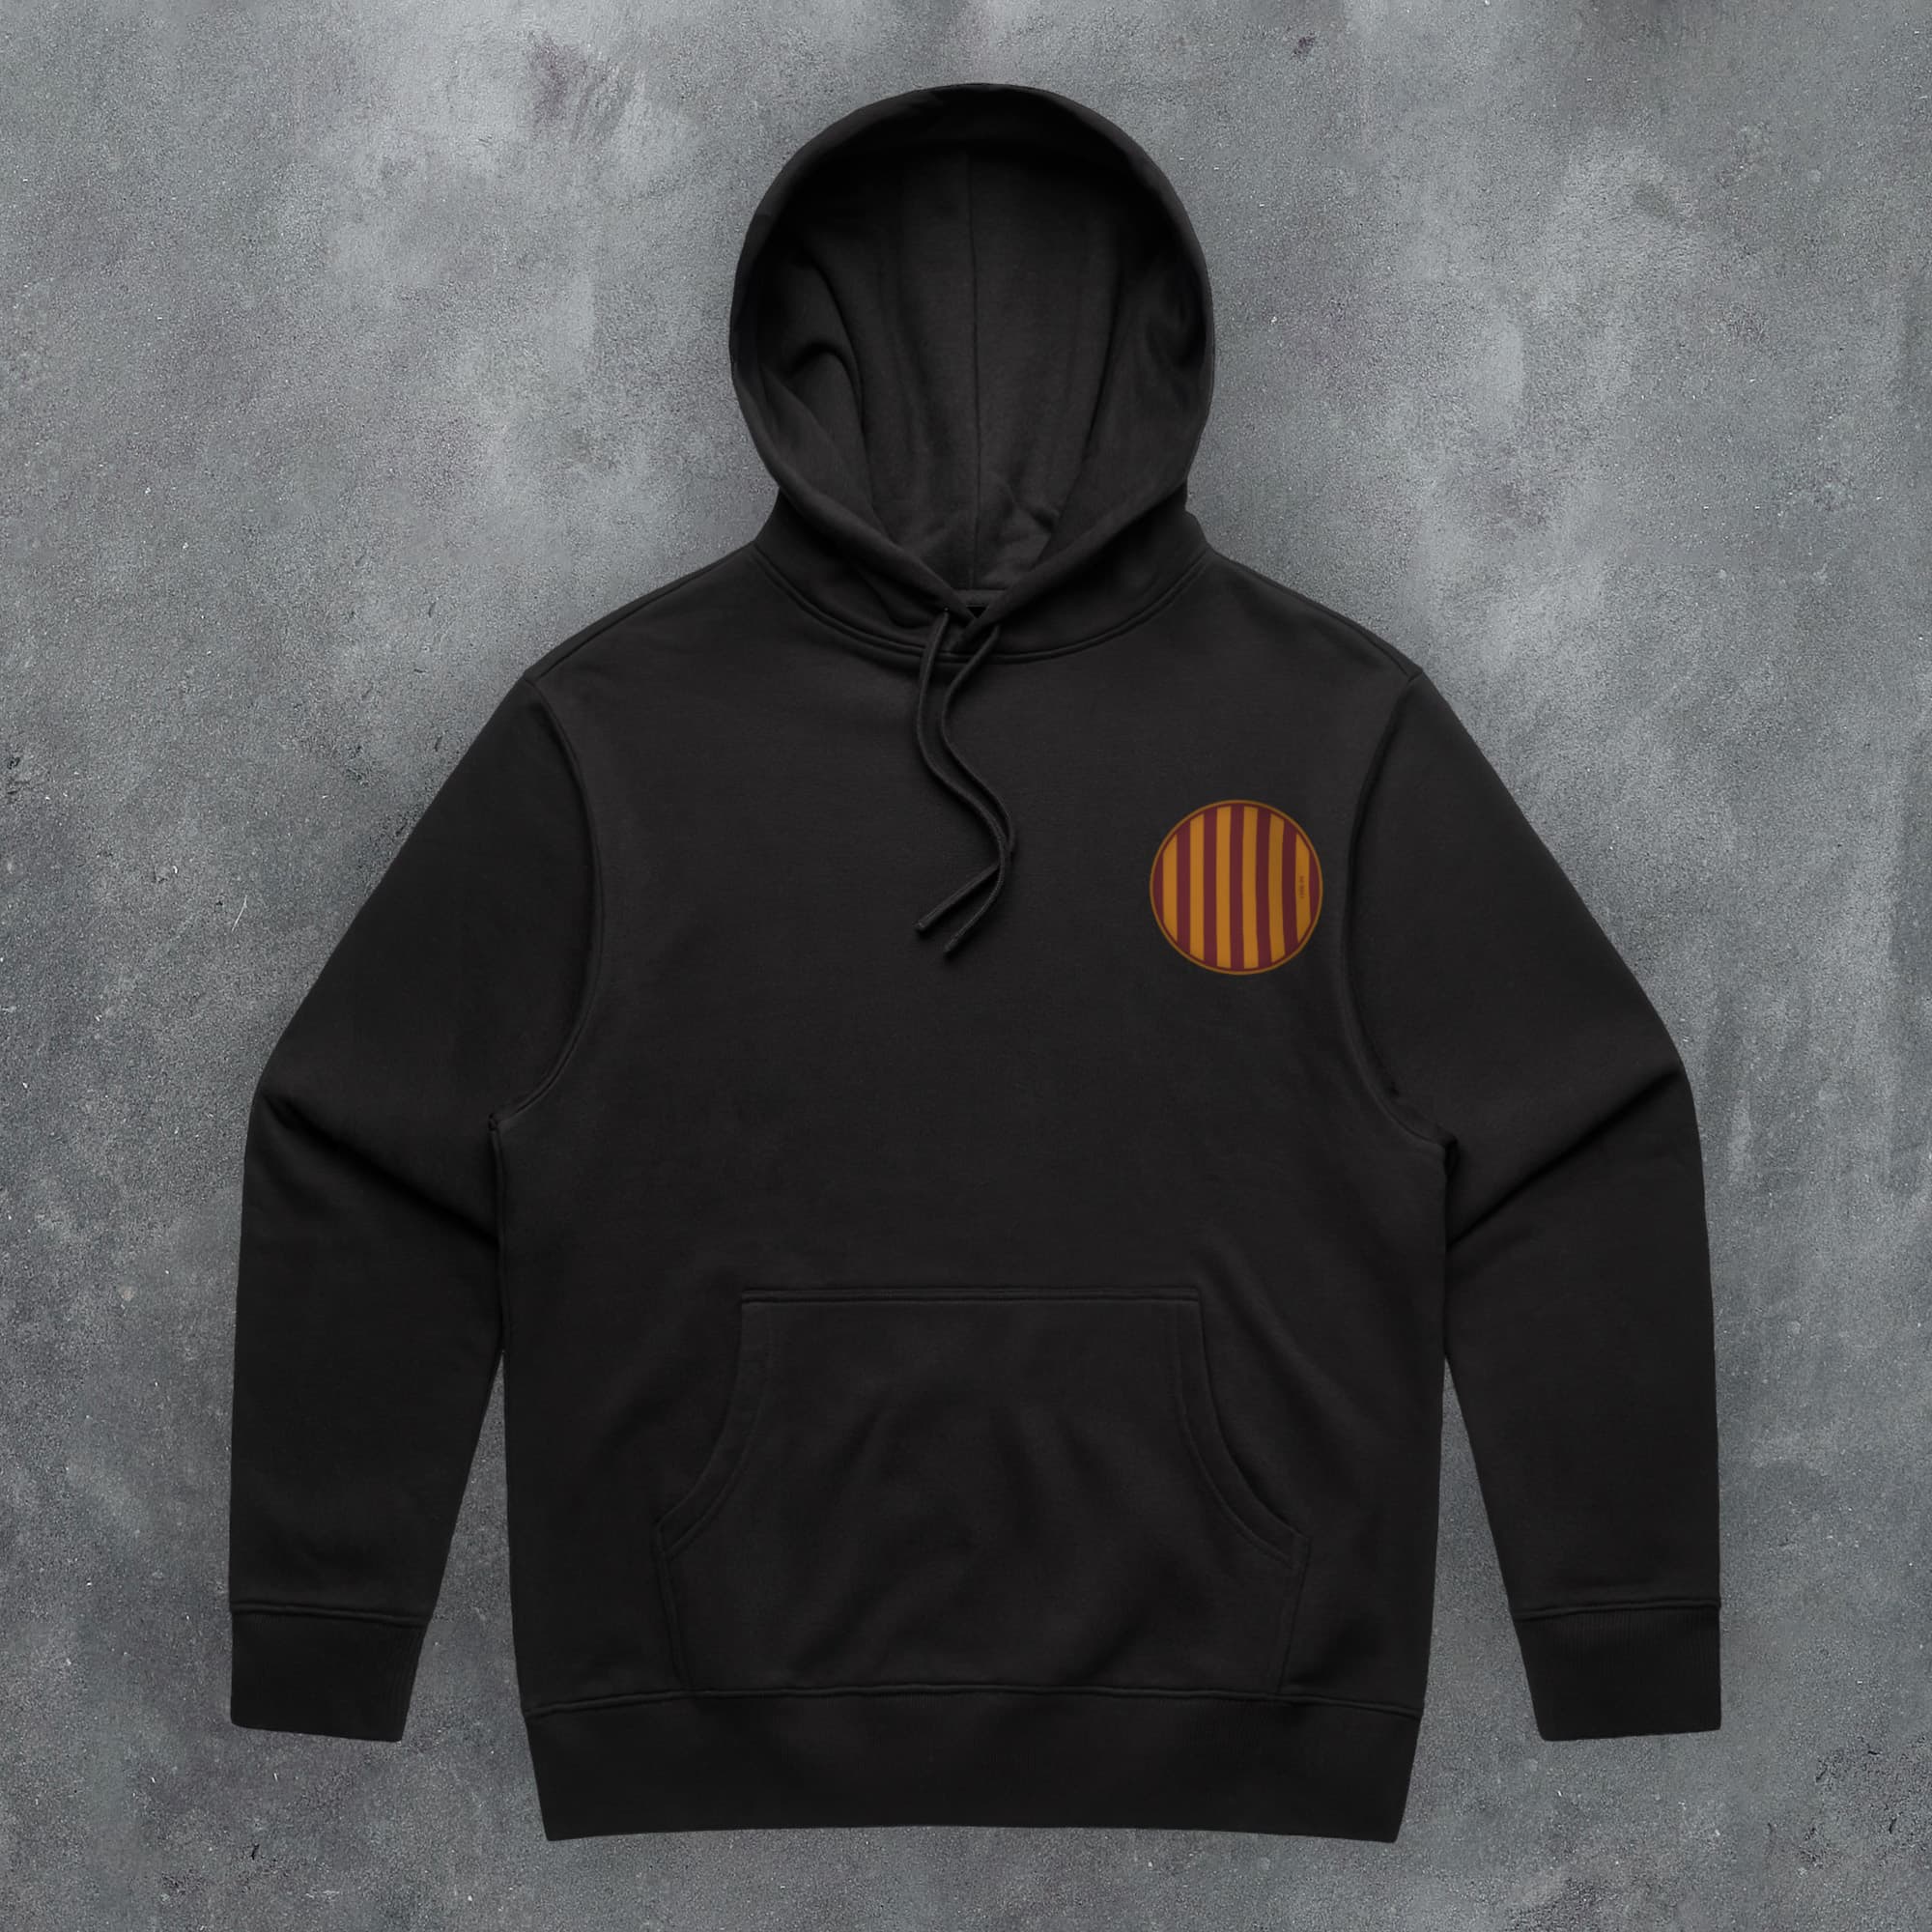 a black hoodie with an orange circle on it